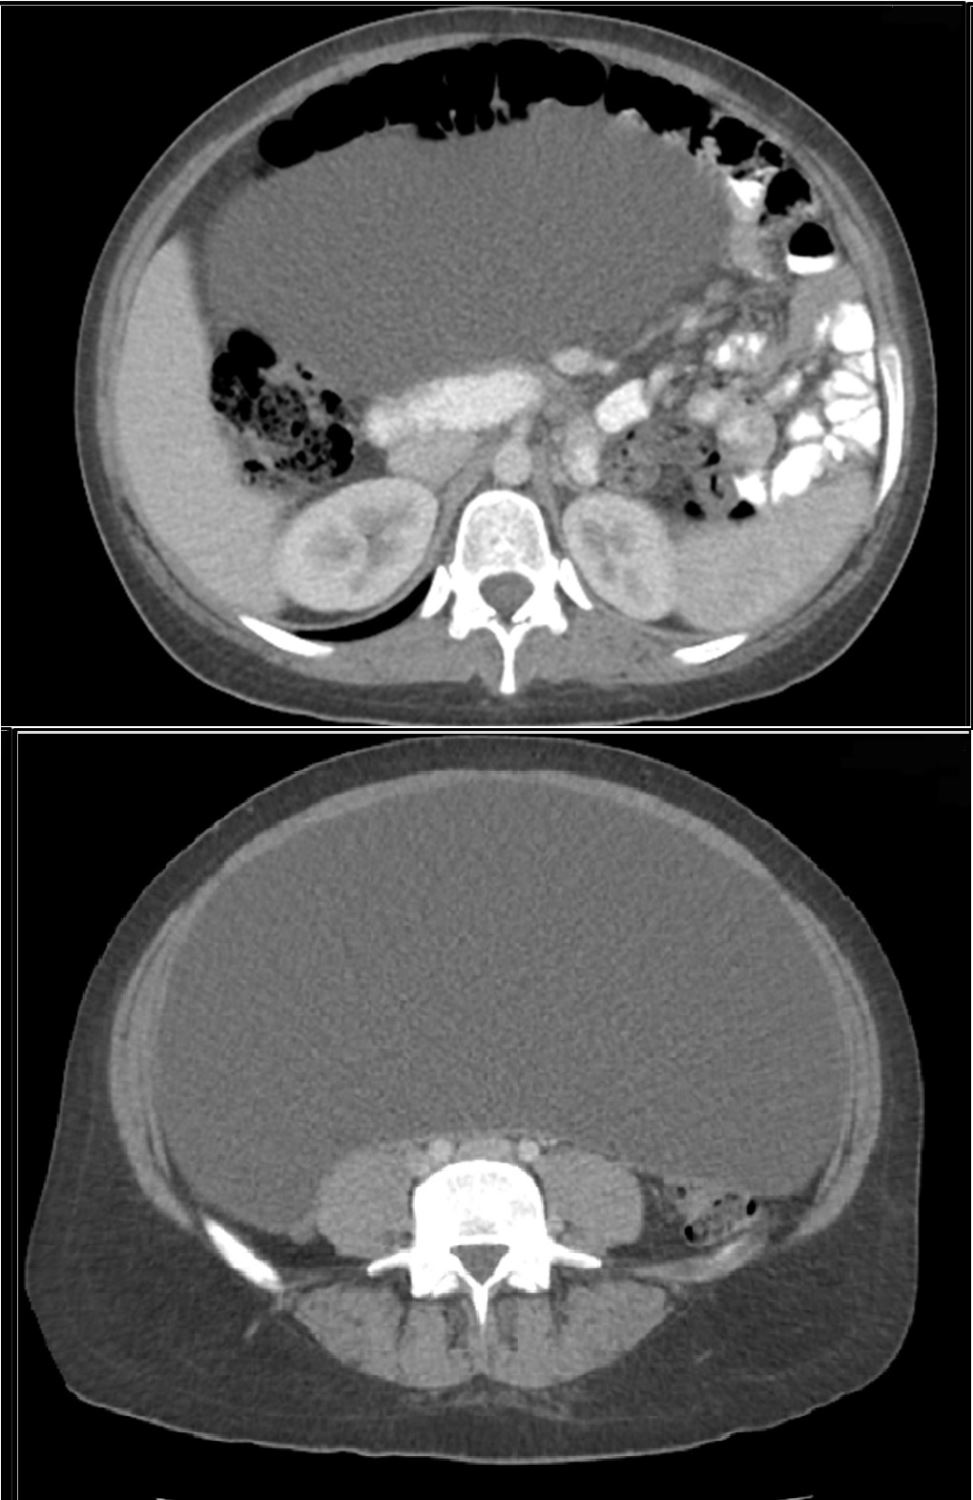 Management of a Giant Cystic Mass in a Young Otherwise Healthy Woman